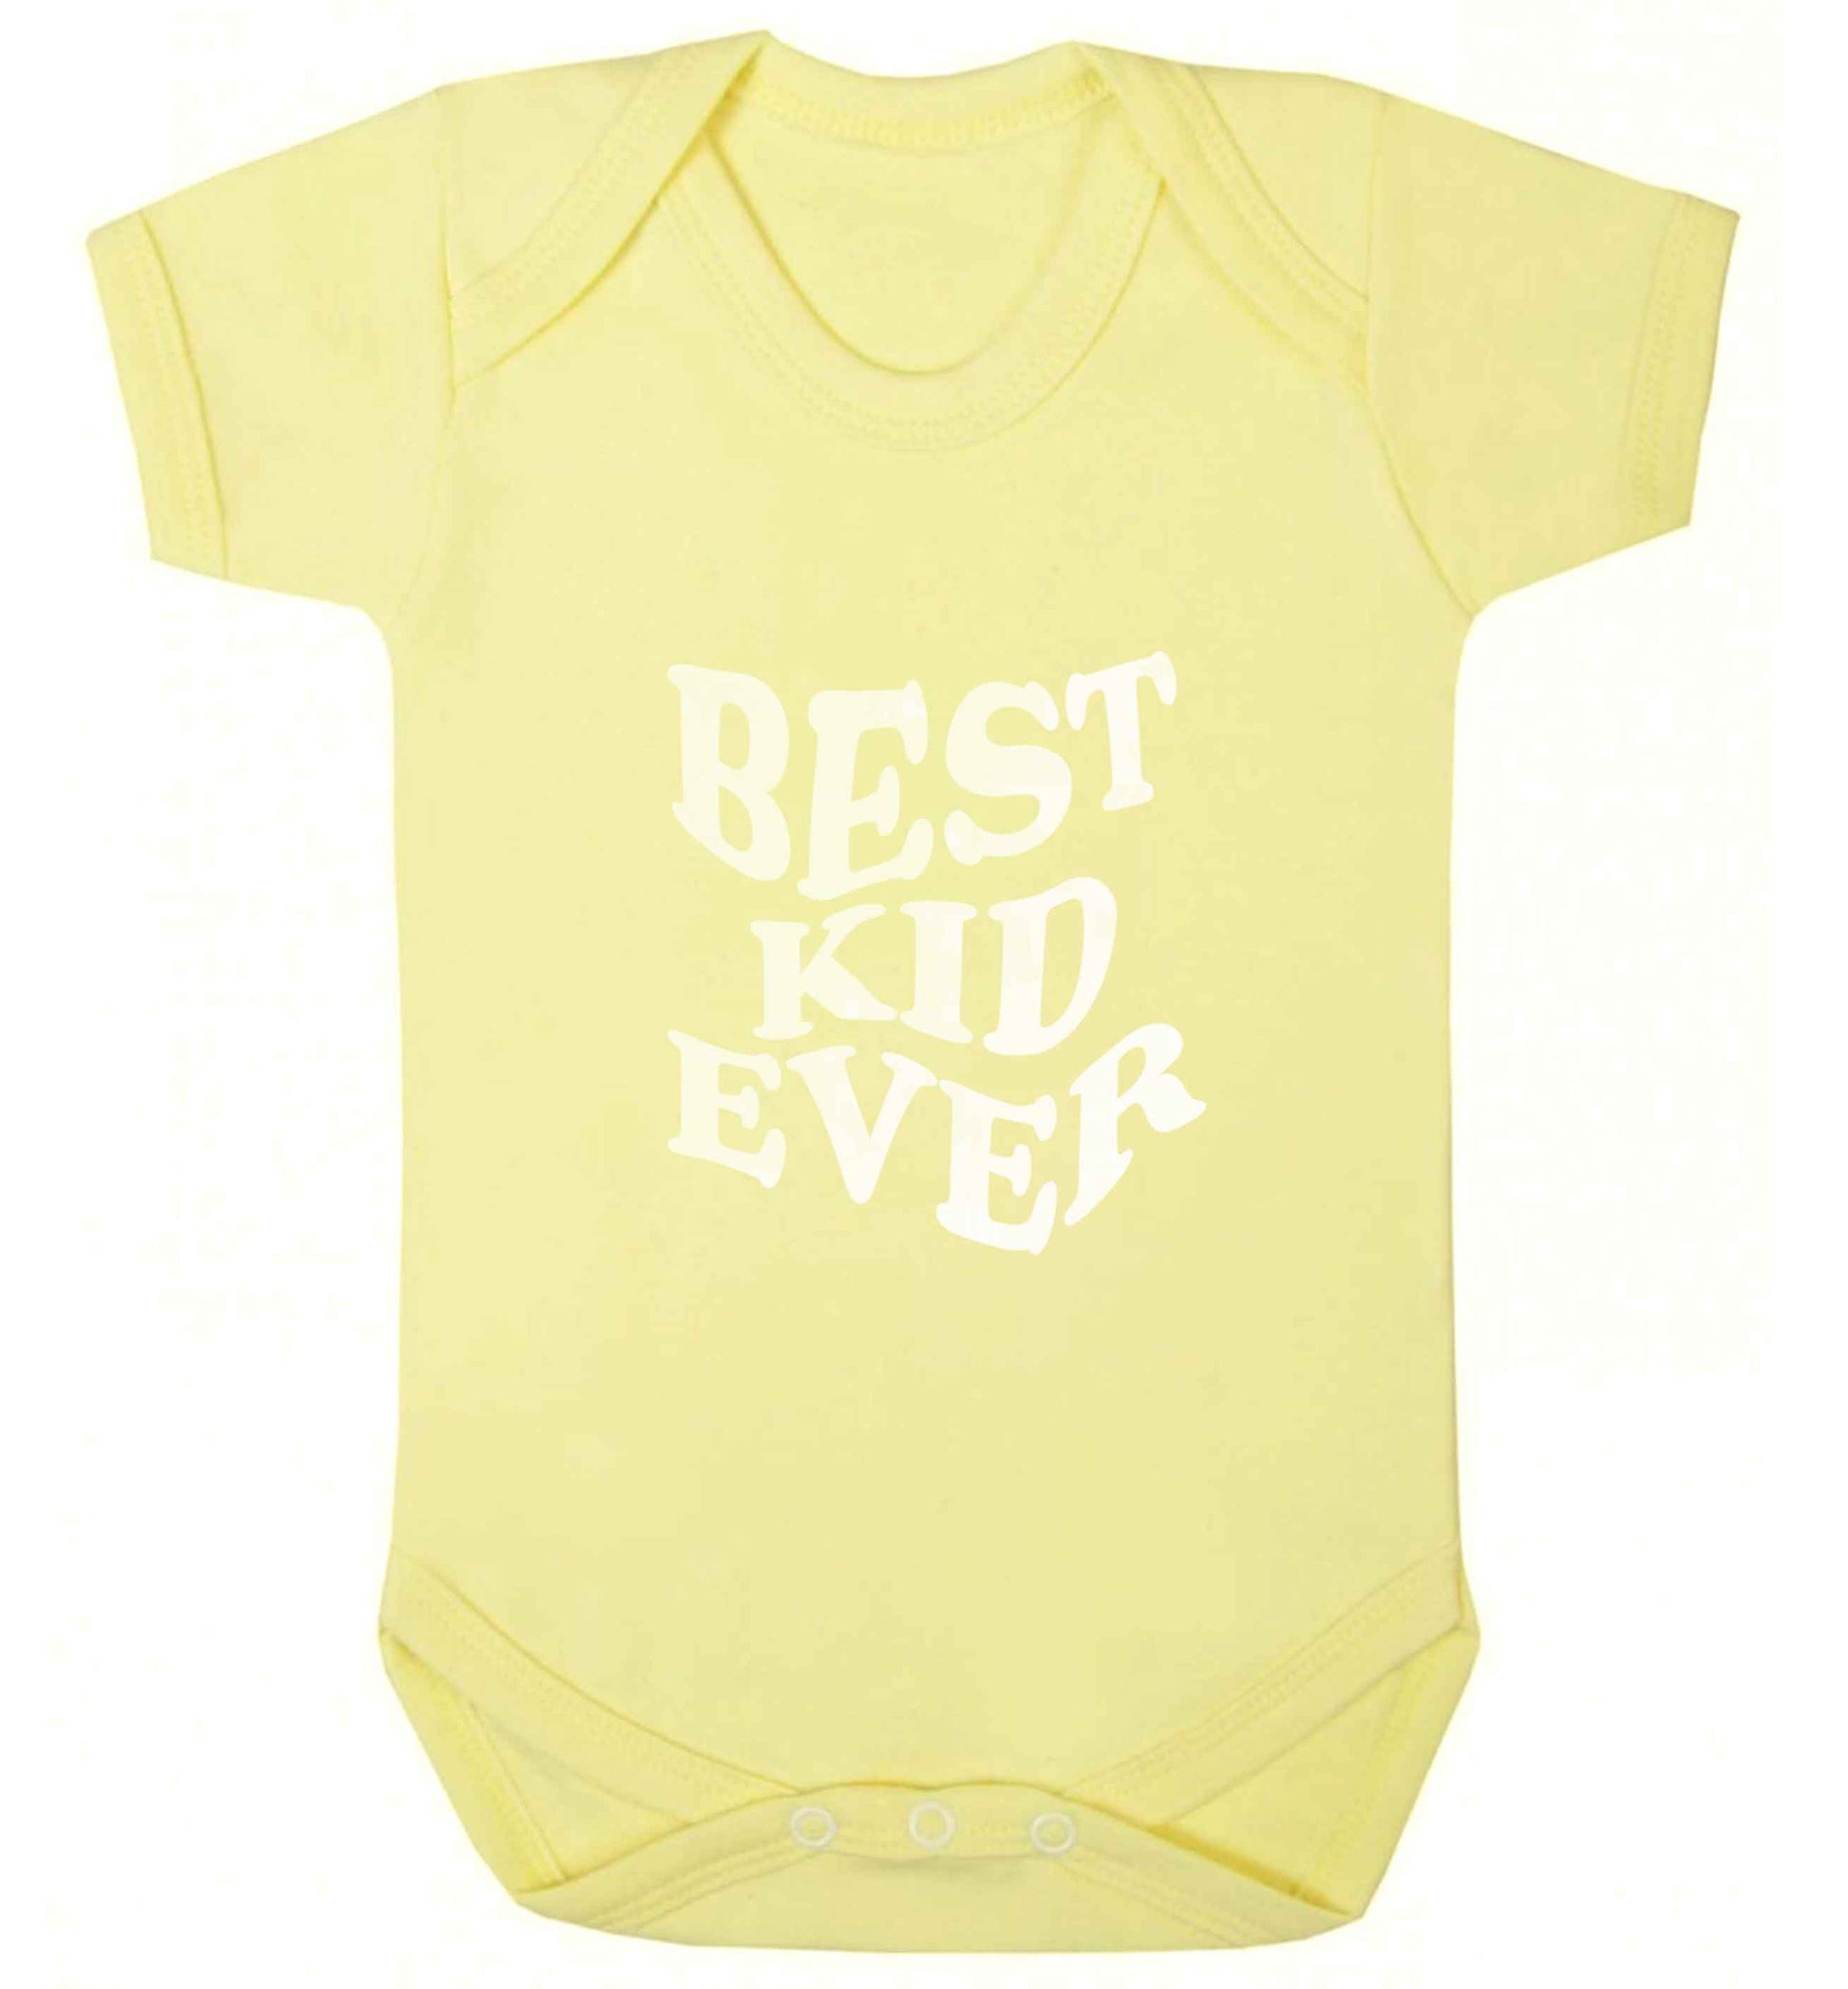 Best kid ever baby vest pale yellow 18-24 months